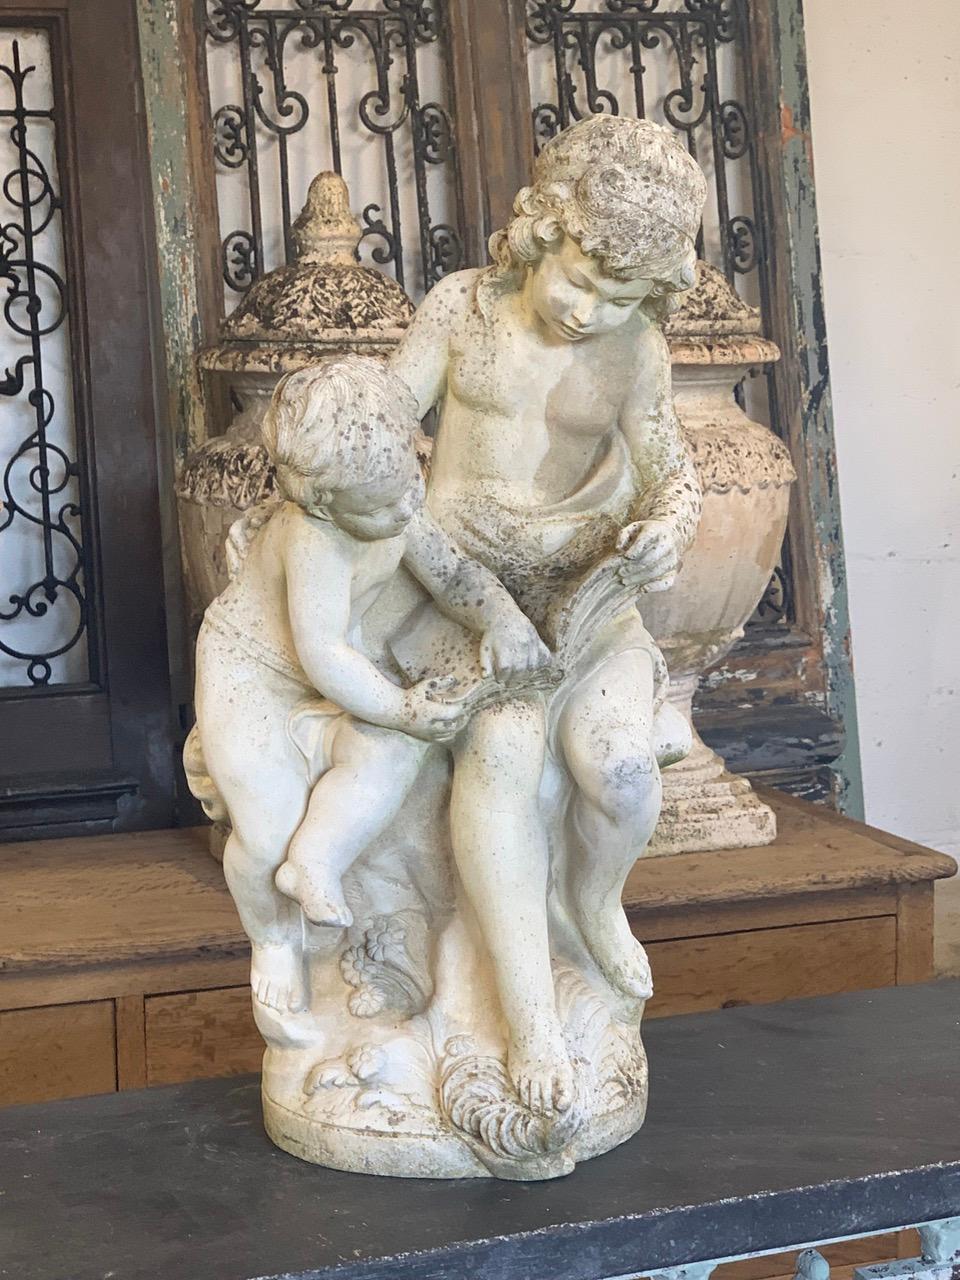 A nice quality composite marble statue by Lorenzo Dal Torrione called CHILDREN AT THE READING. The marble has a nice weathered look which will look nice indoors or in the garden.